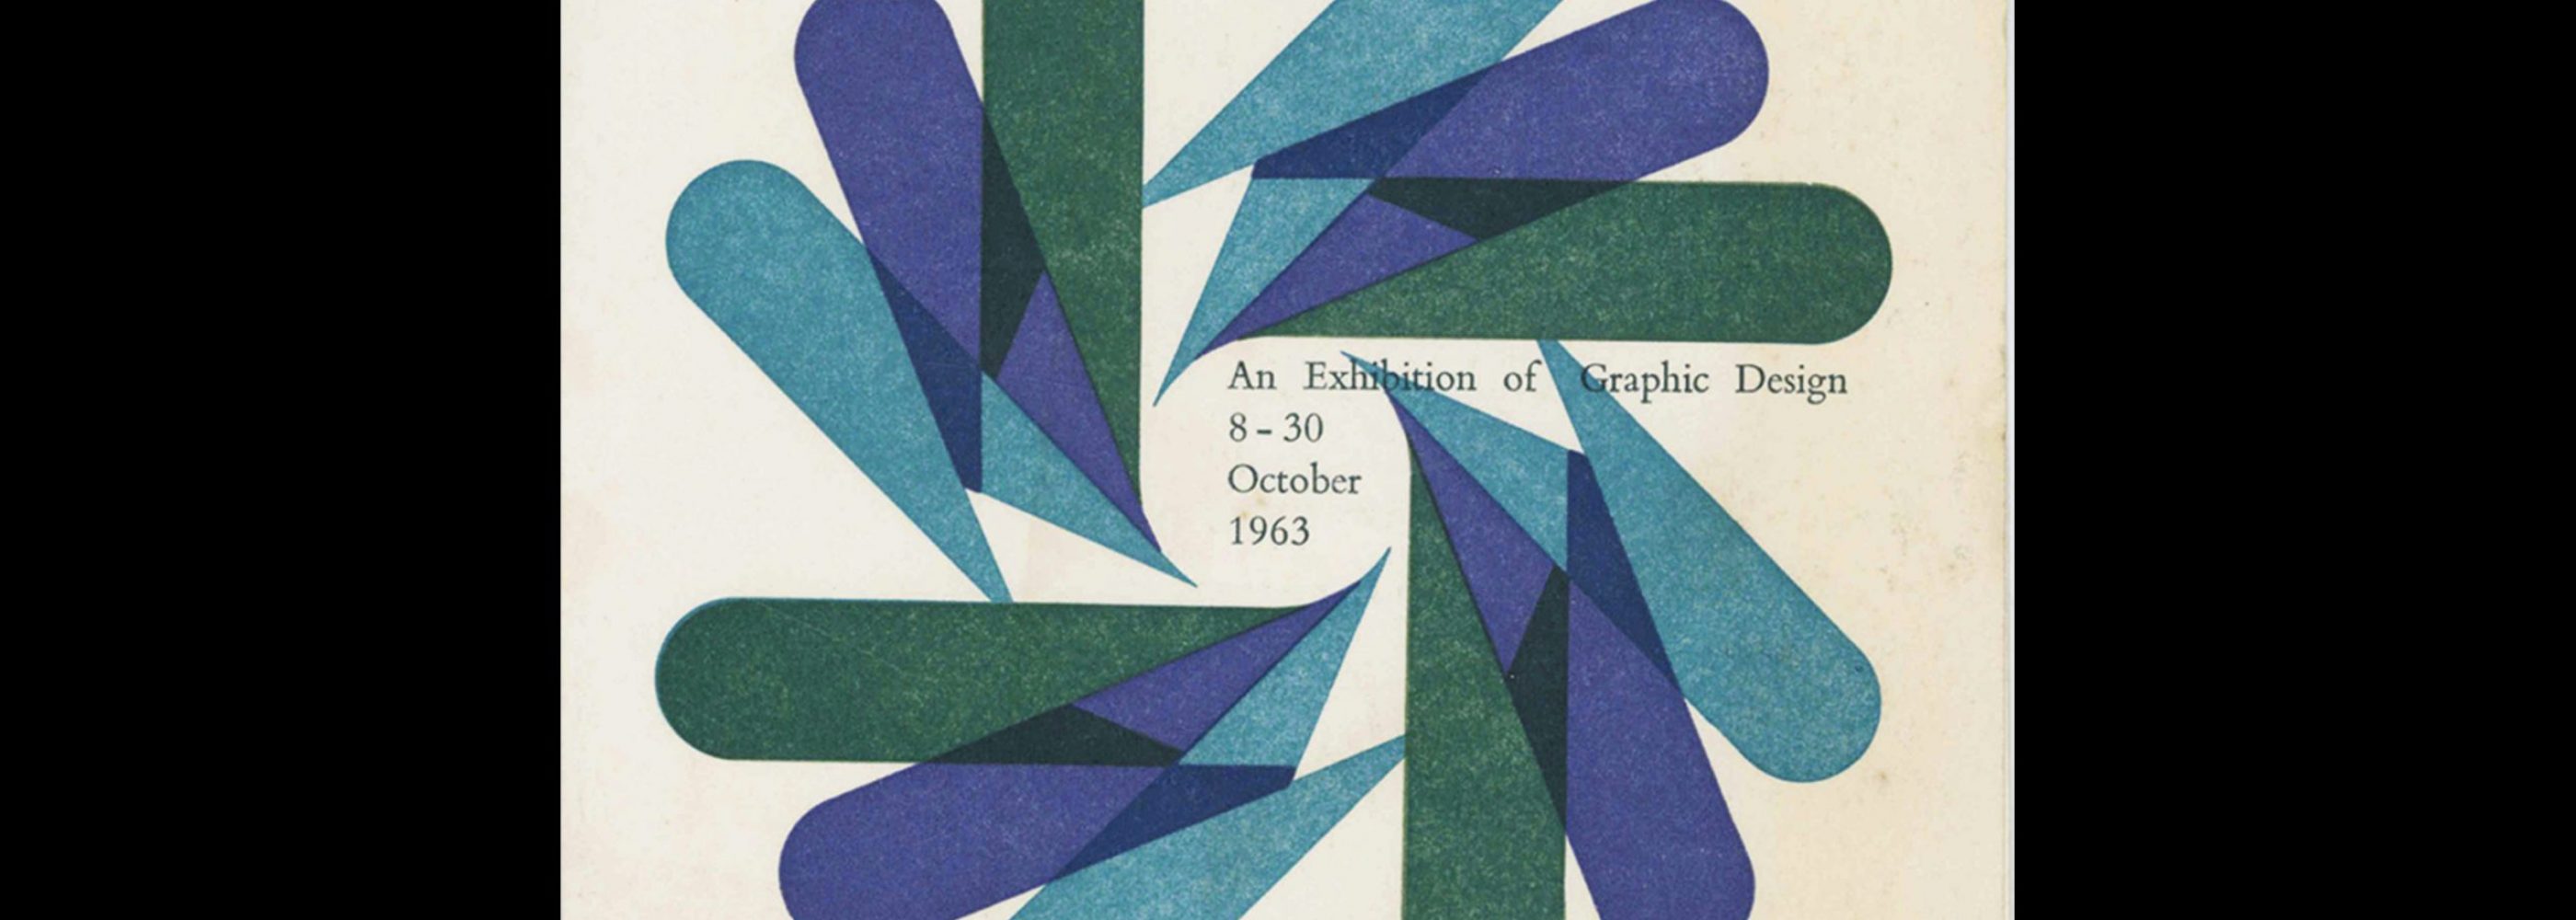 An Exhibition of Graphic Design, Monotype, 1963